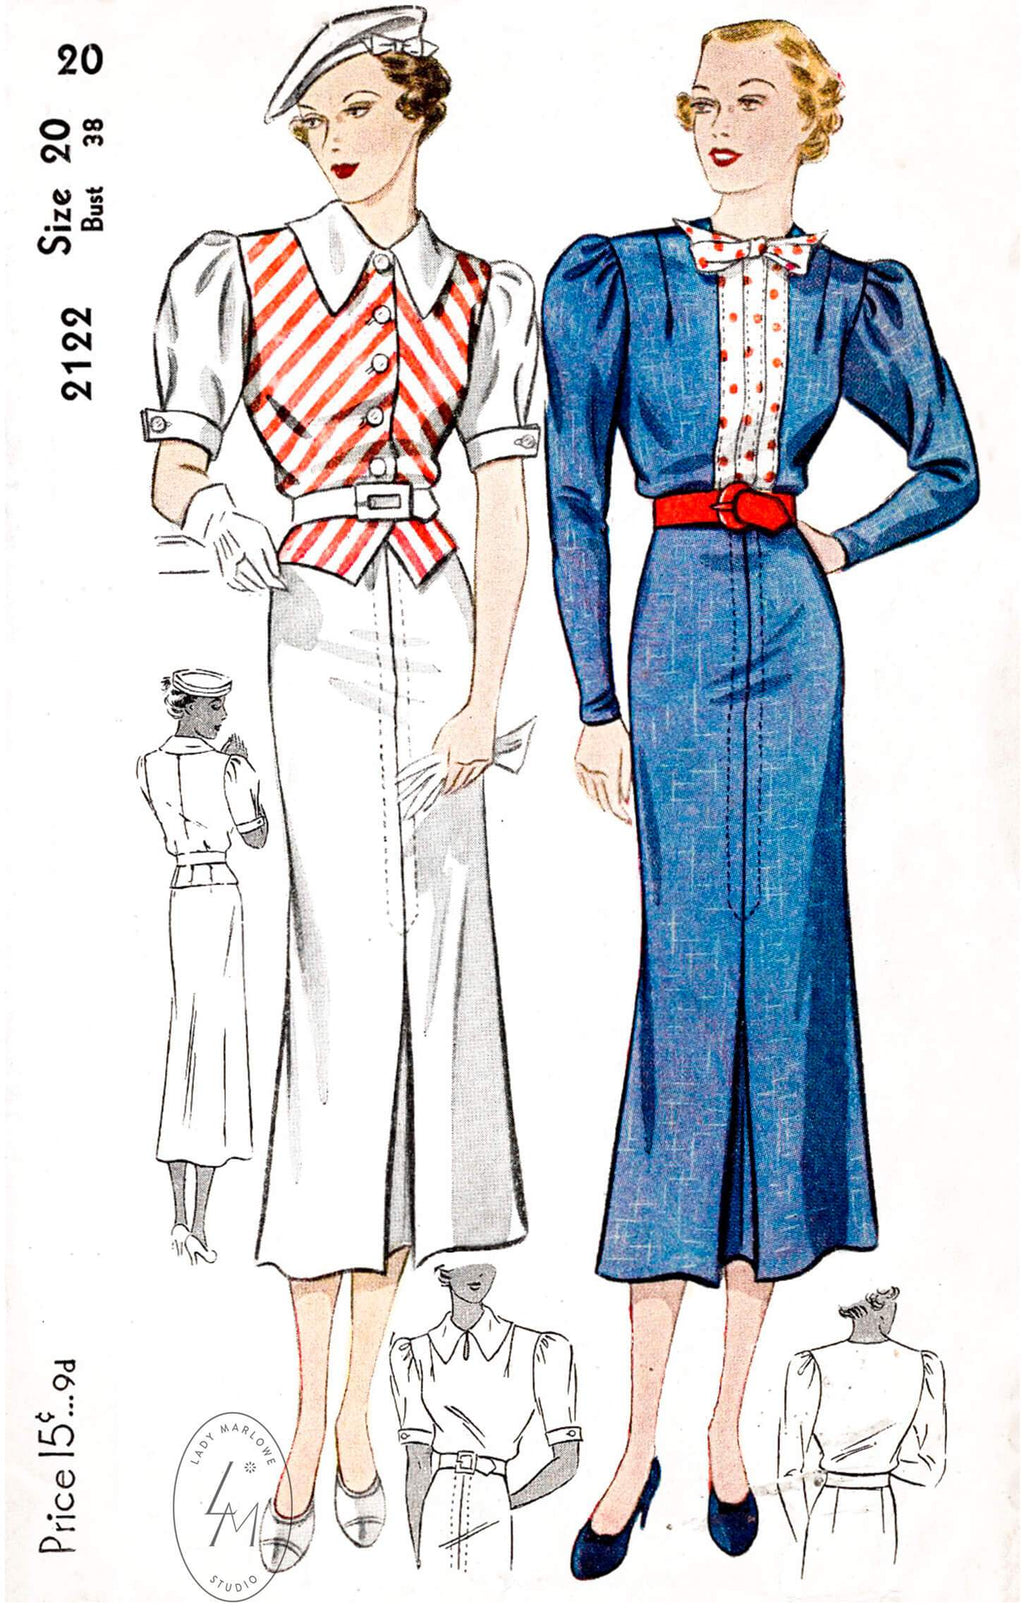 Simplicity 2122 1930s suit dress vintage sewing pattern reproduction